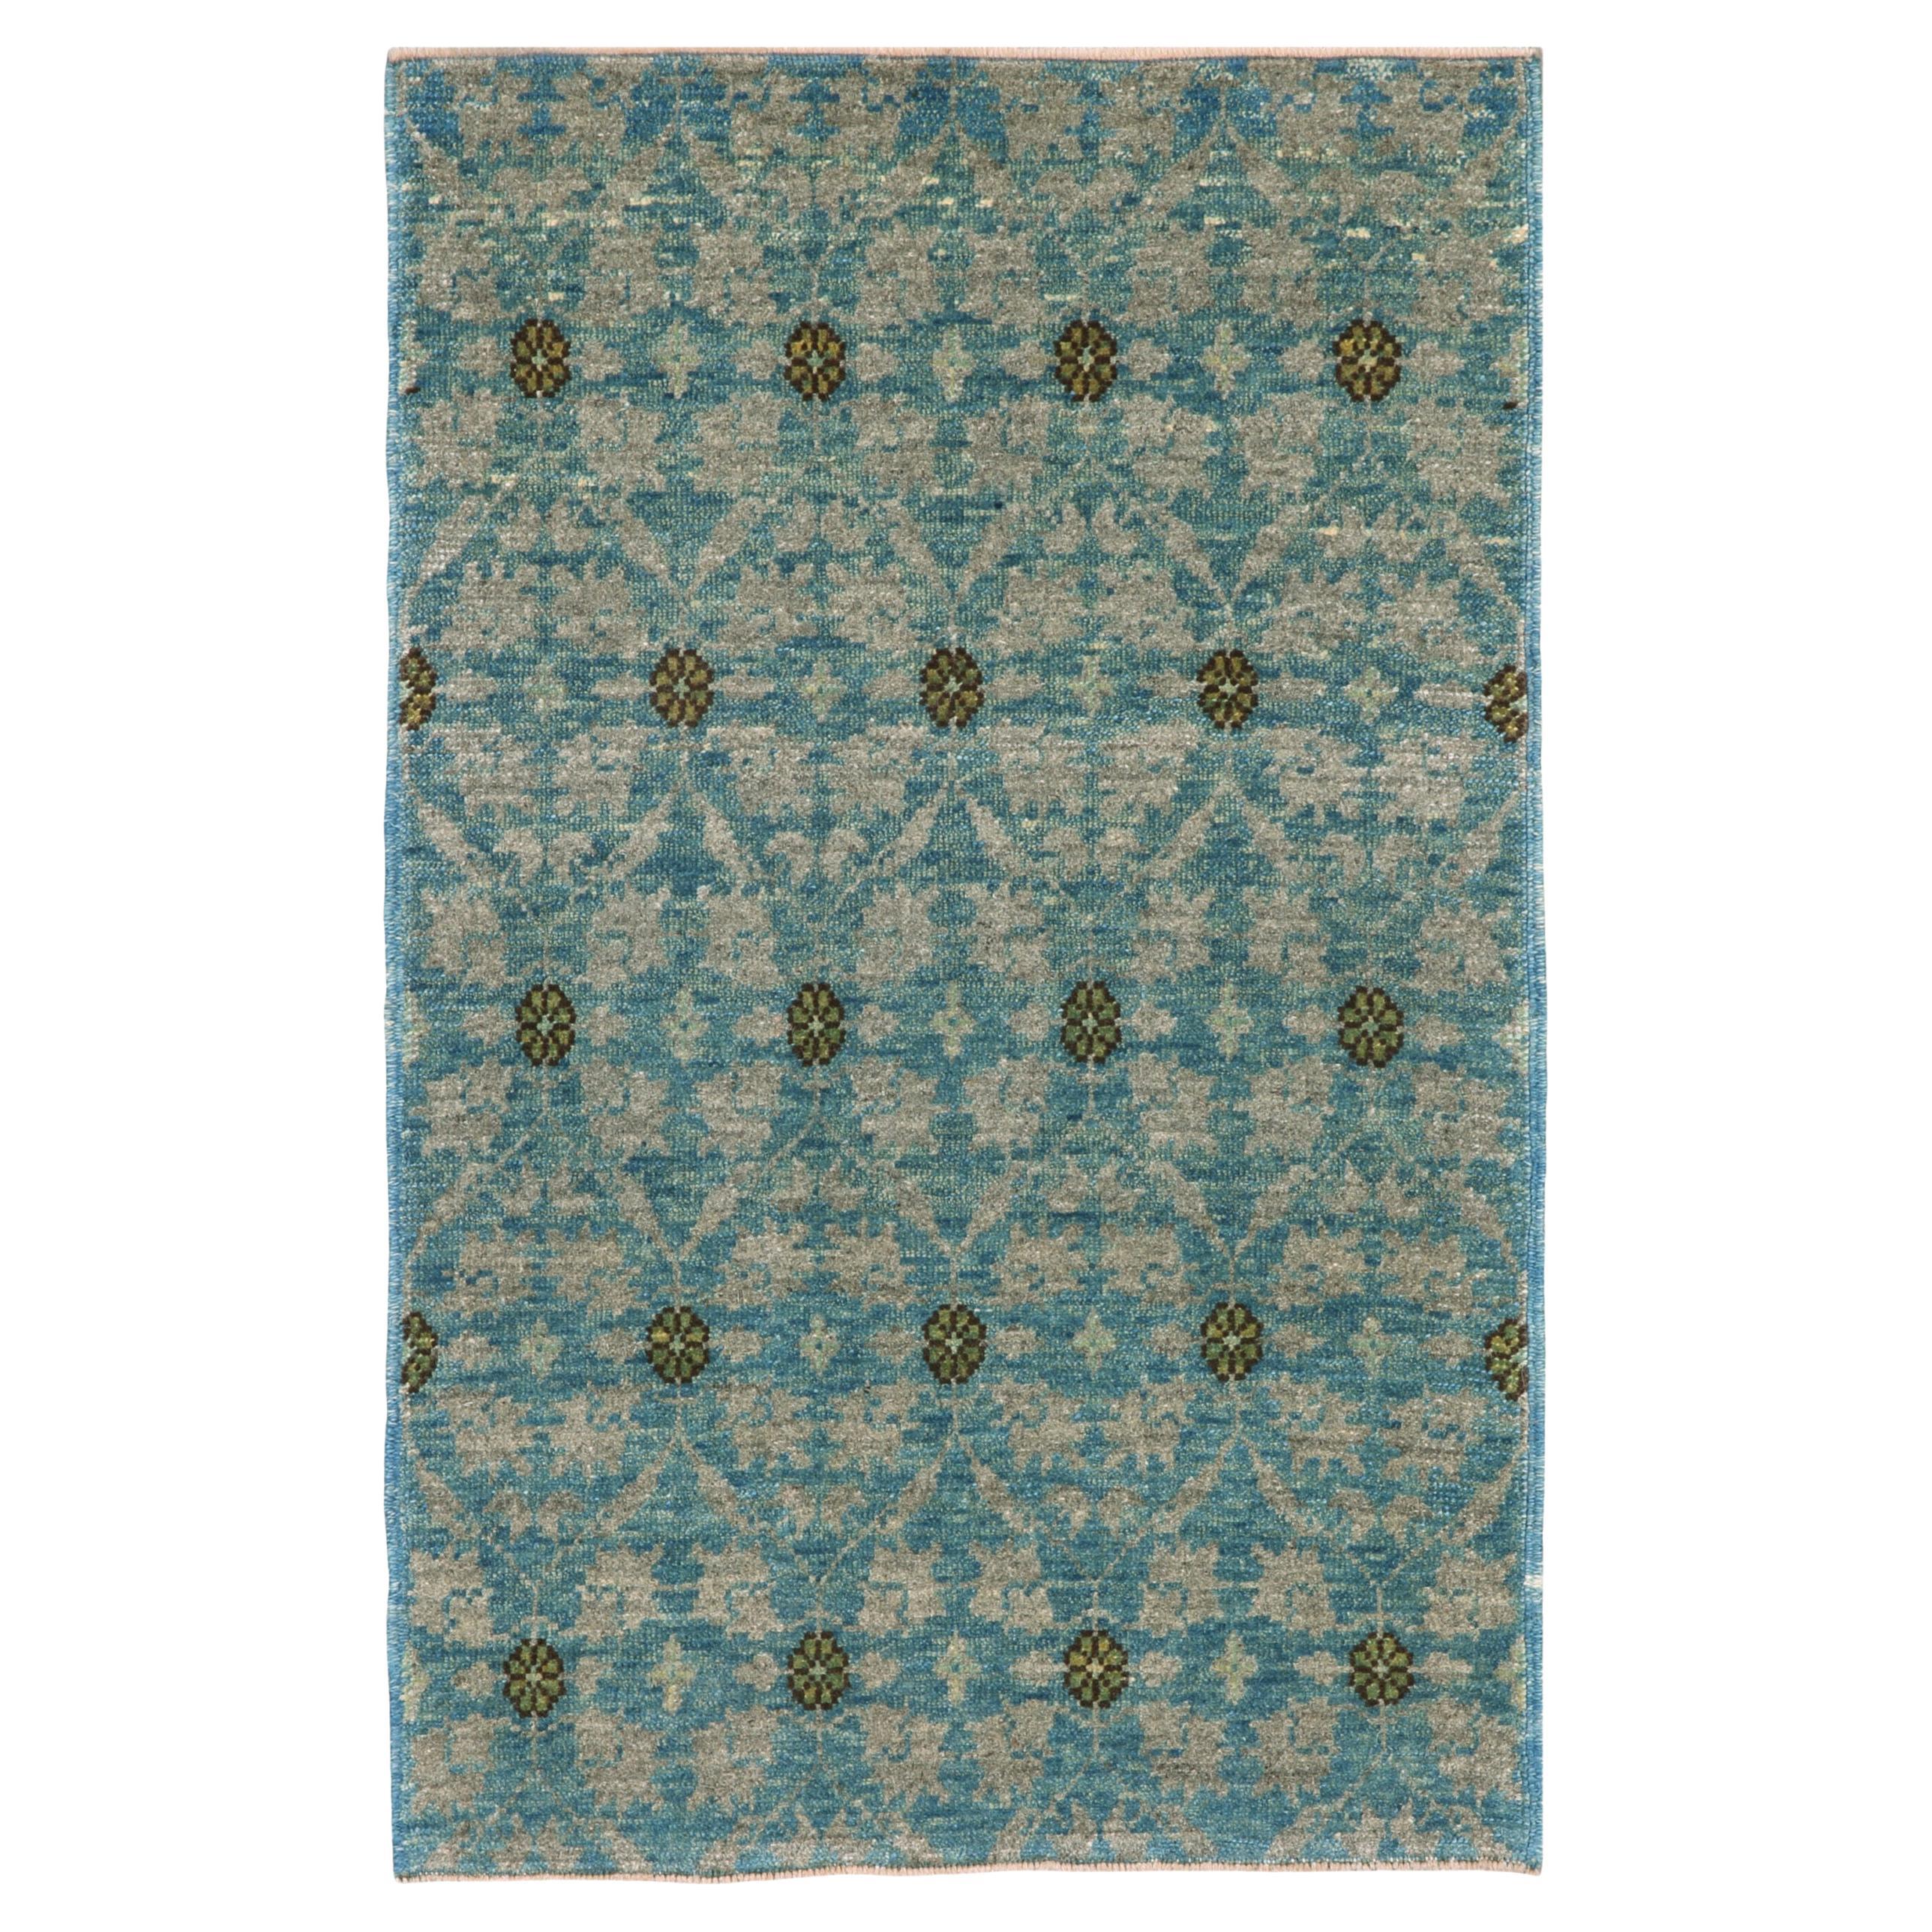 Ararat Collection, Mamluk Wagireh Rug with Flower Lattice Natural Dyed Carpet For Sale